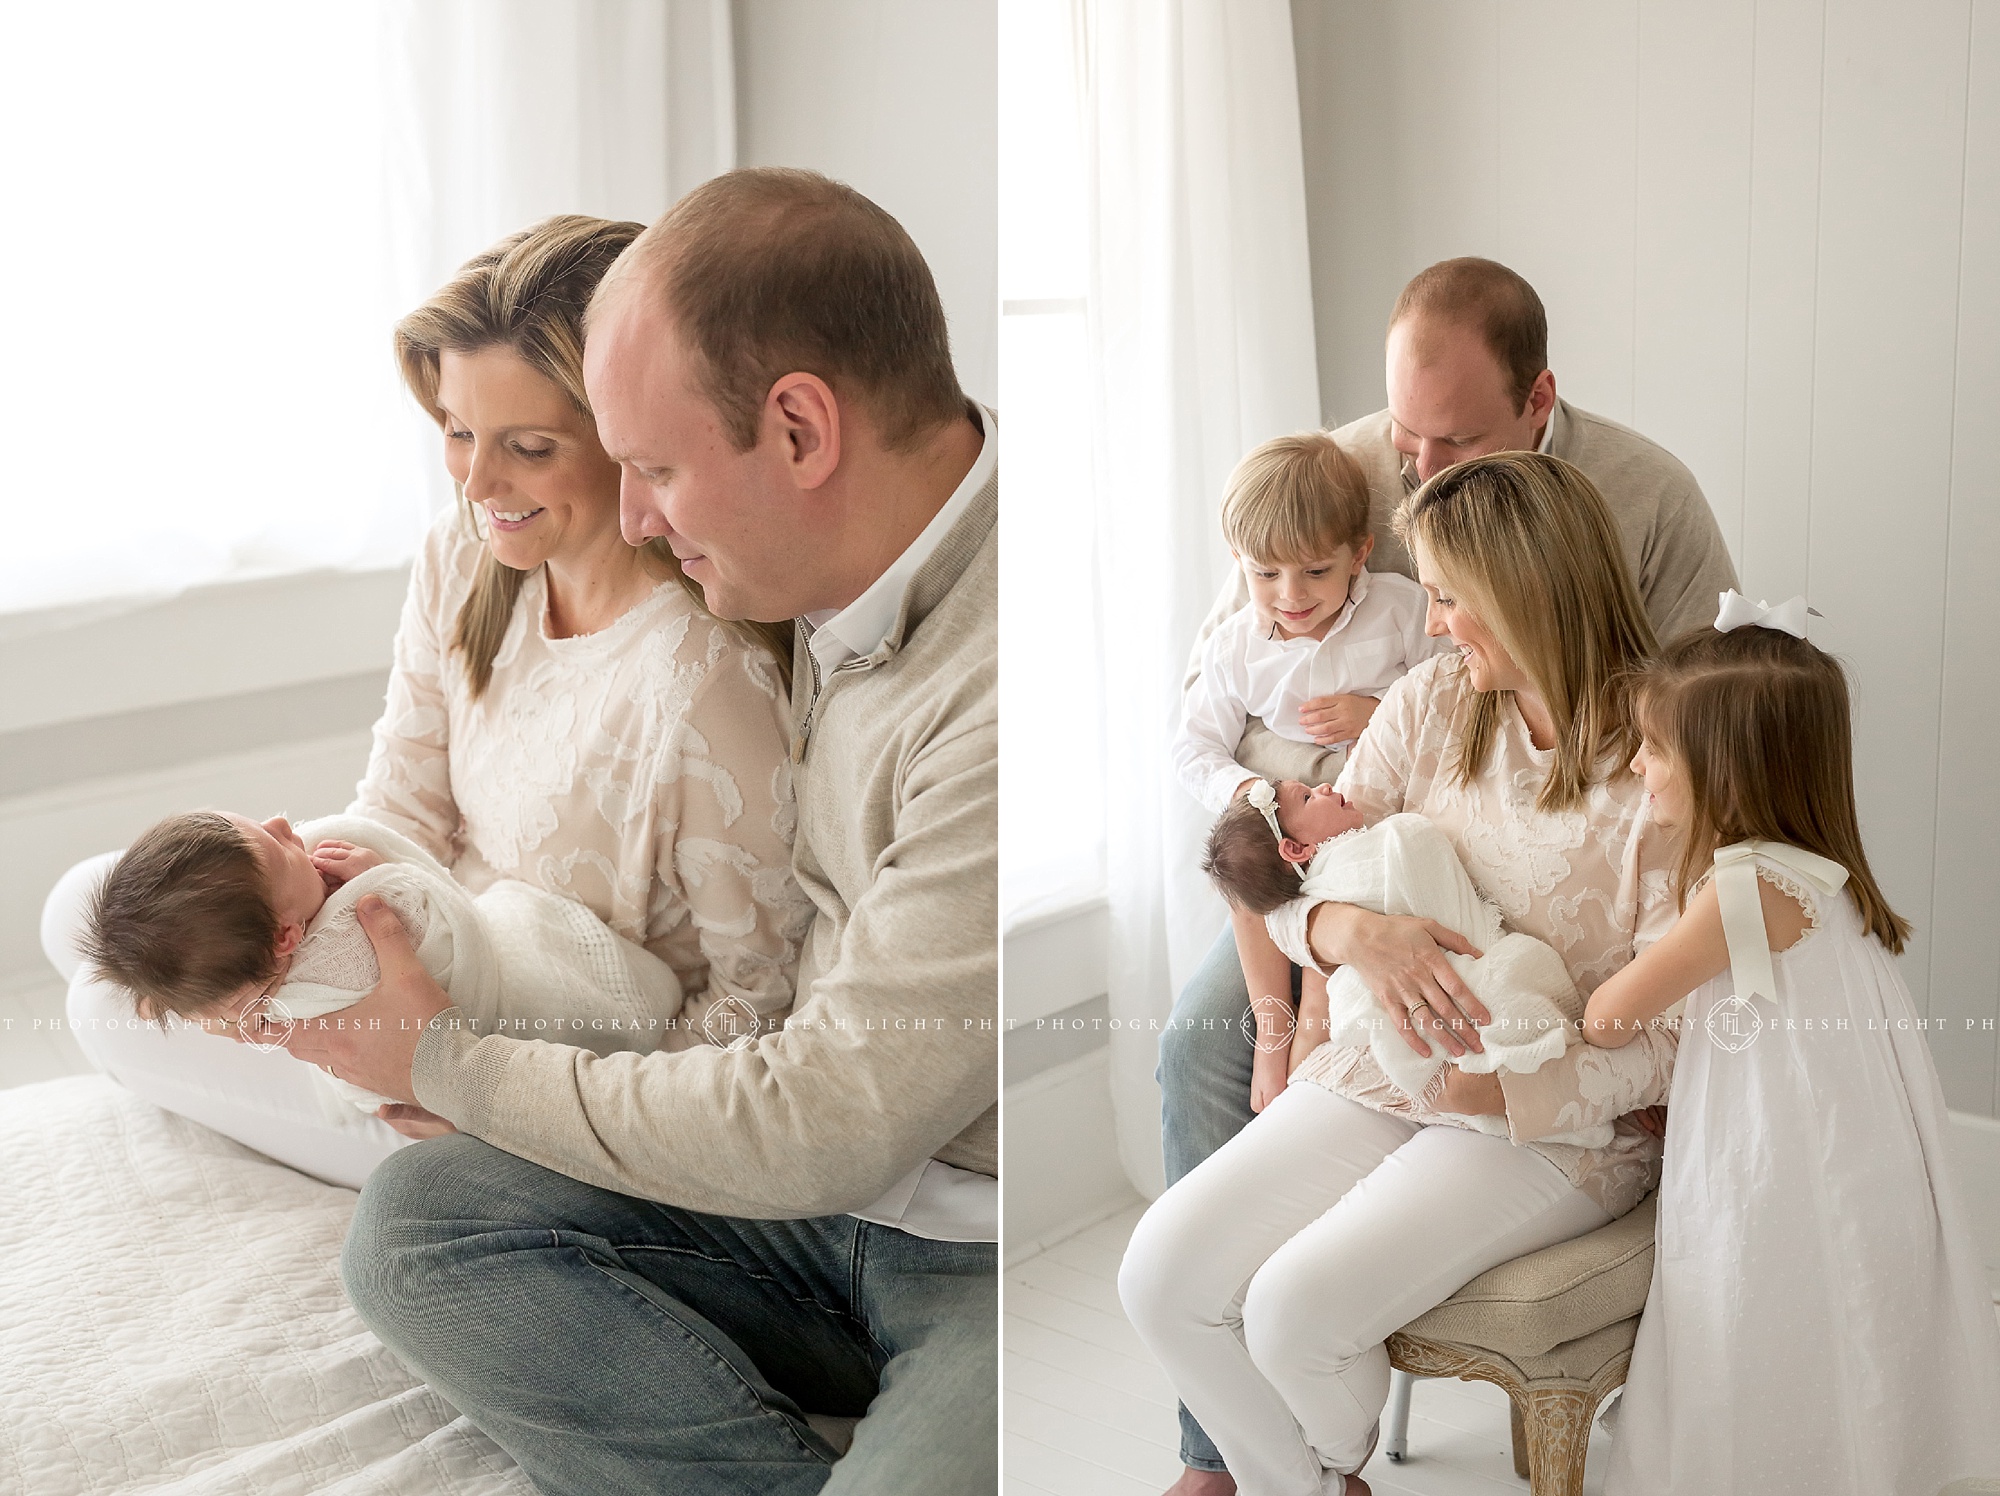 Family with newborn baby sister in a Houston photography studio